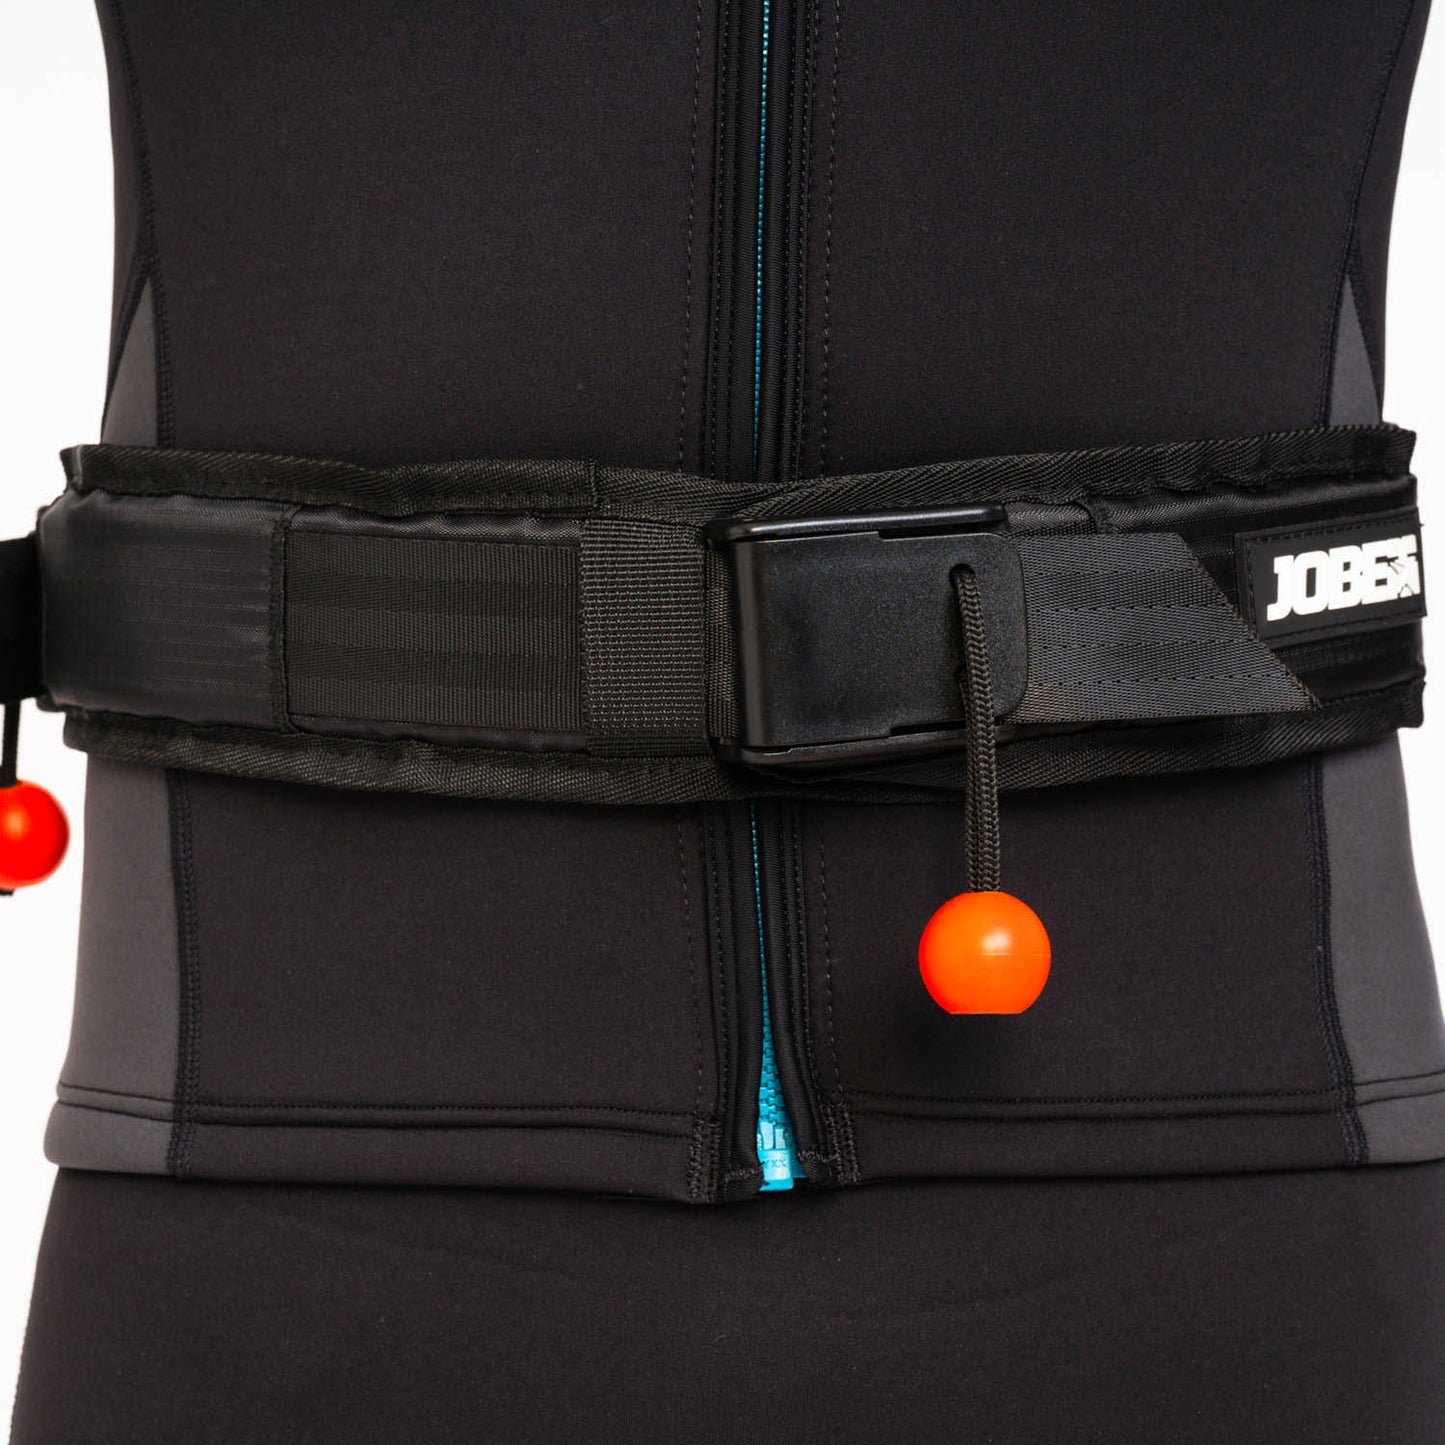 JOBE PADDED PADDLEBOARD QUICK RELEASE BELT **SAVE OVER 30%**